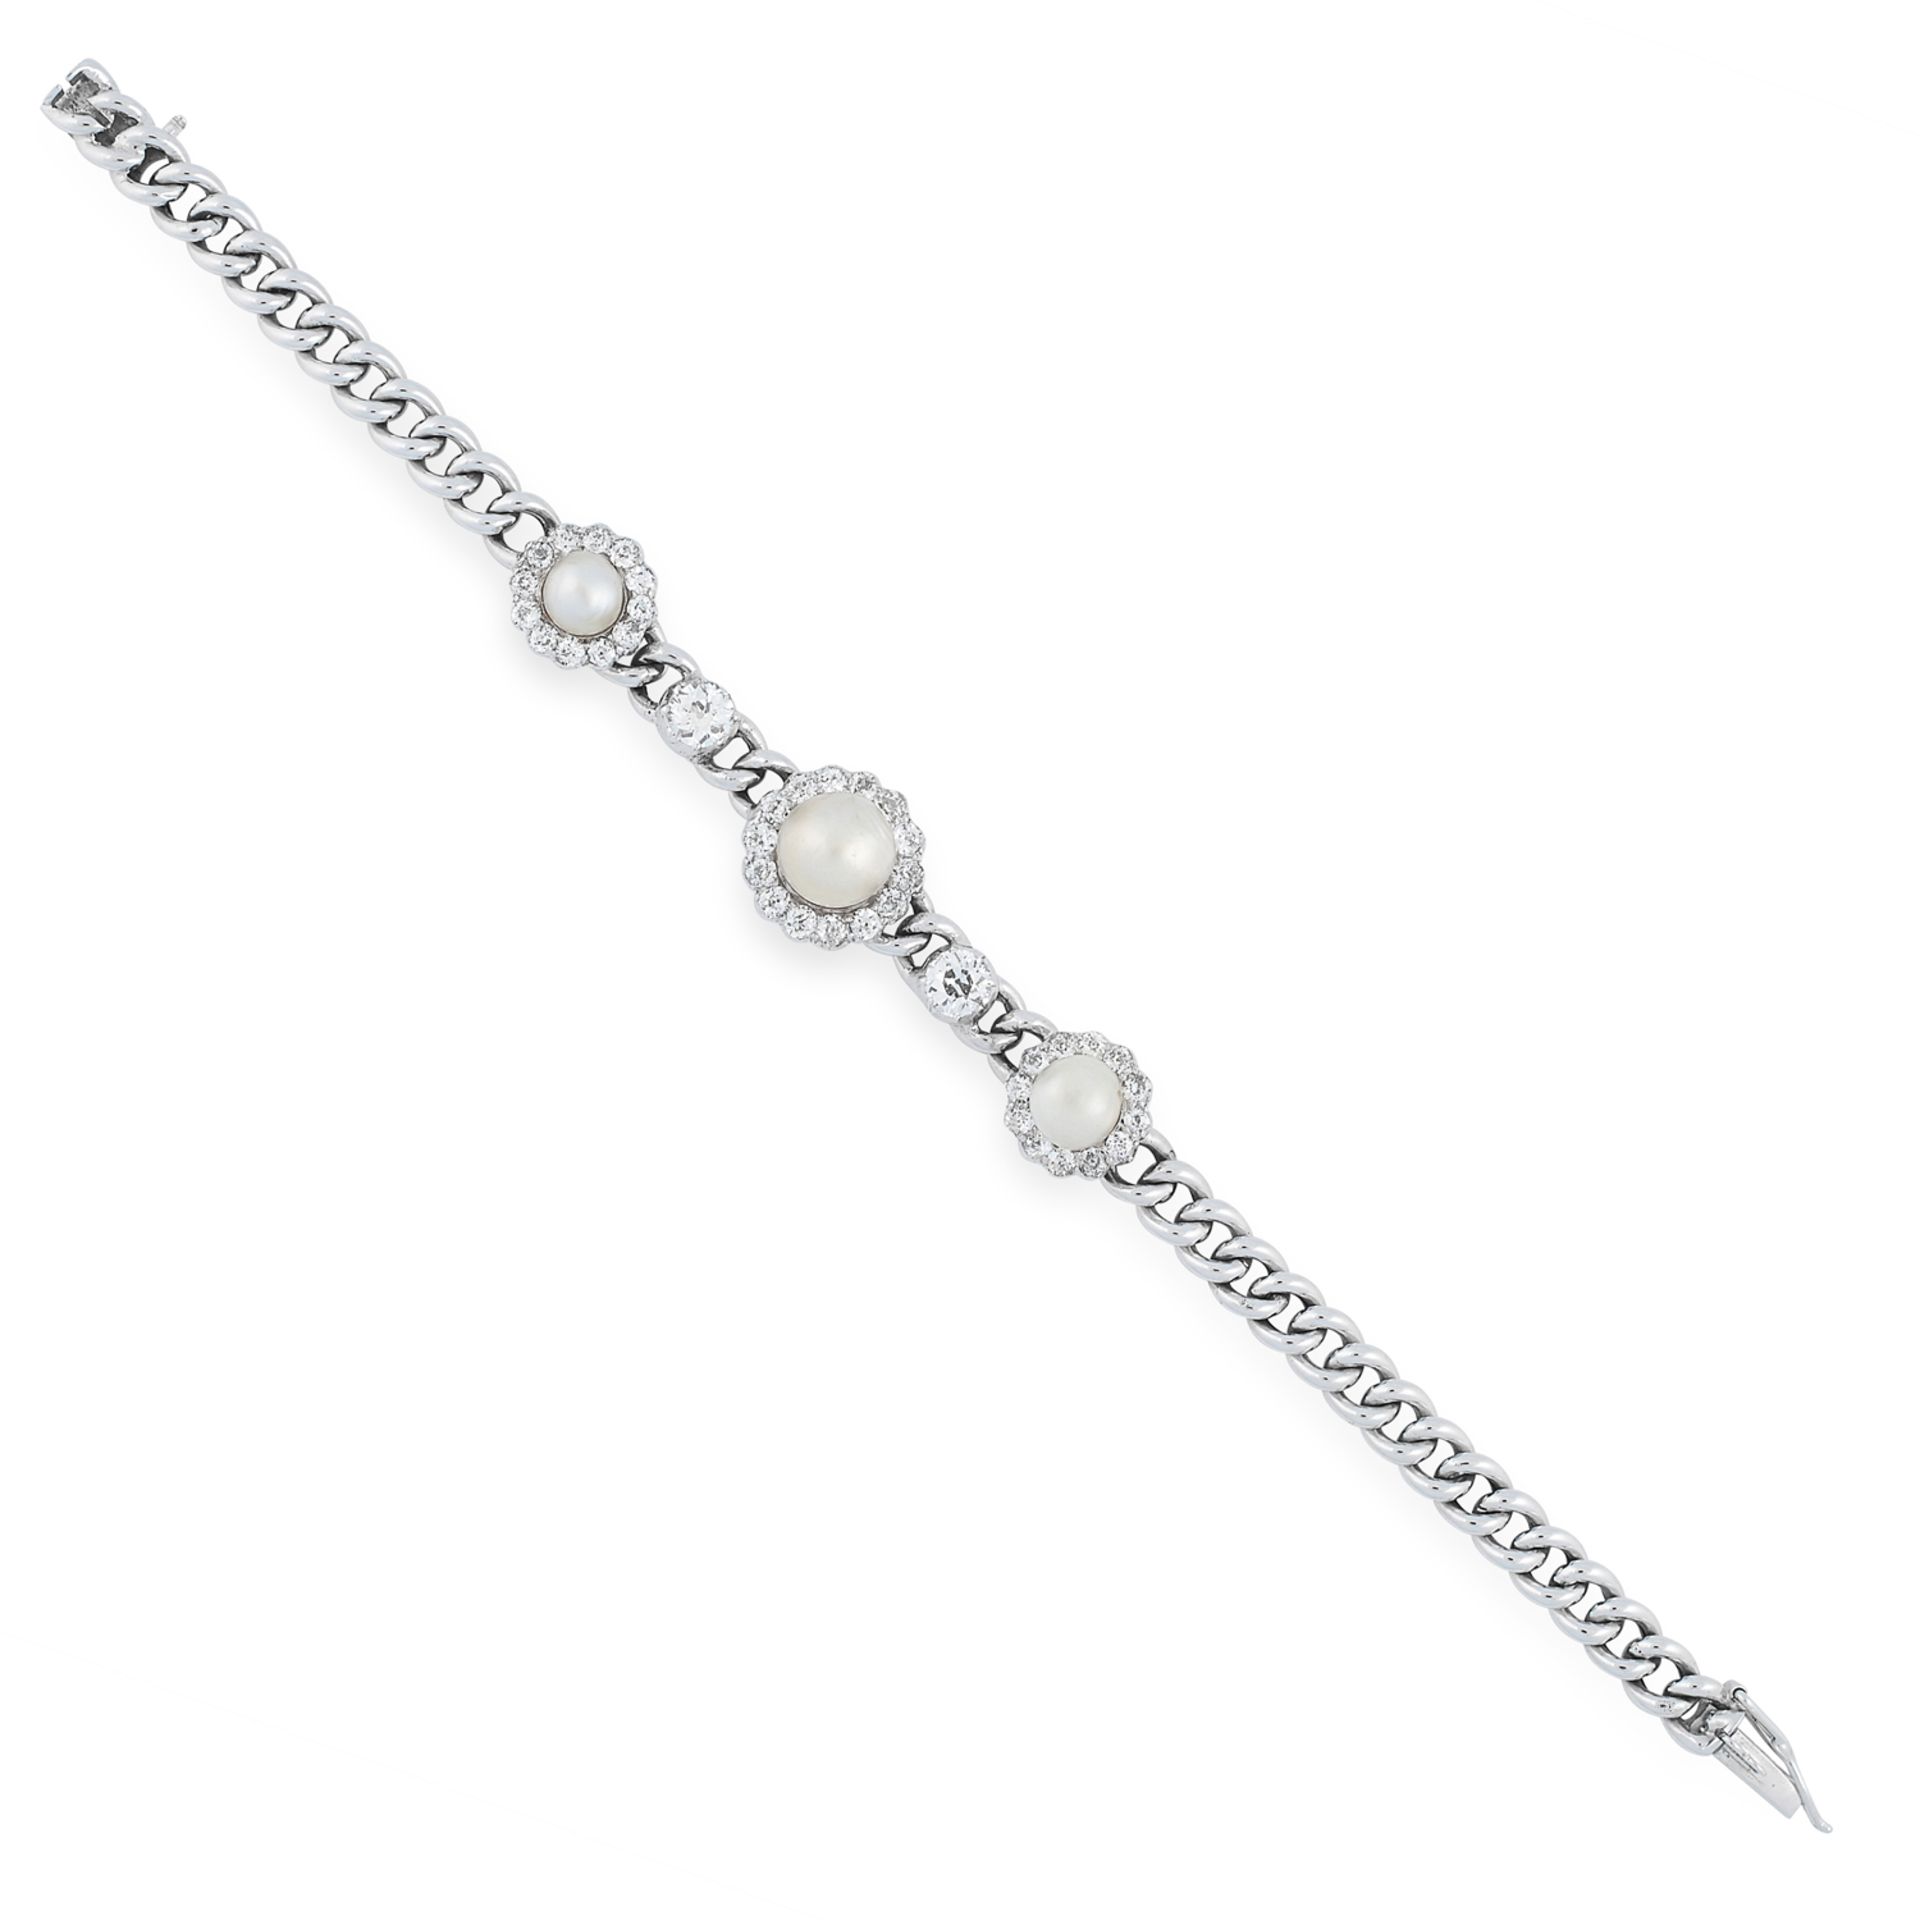 A NATURAL PEARL AND DIAMOND BRACELET in 18ct white gold, set with three pearls of 8.4mm, 6.8mm and